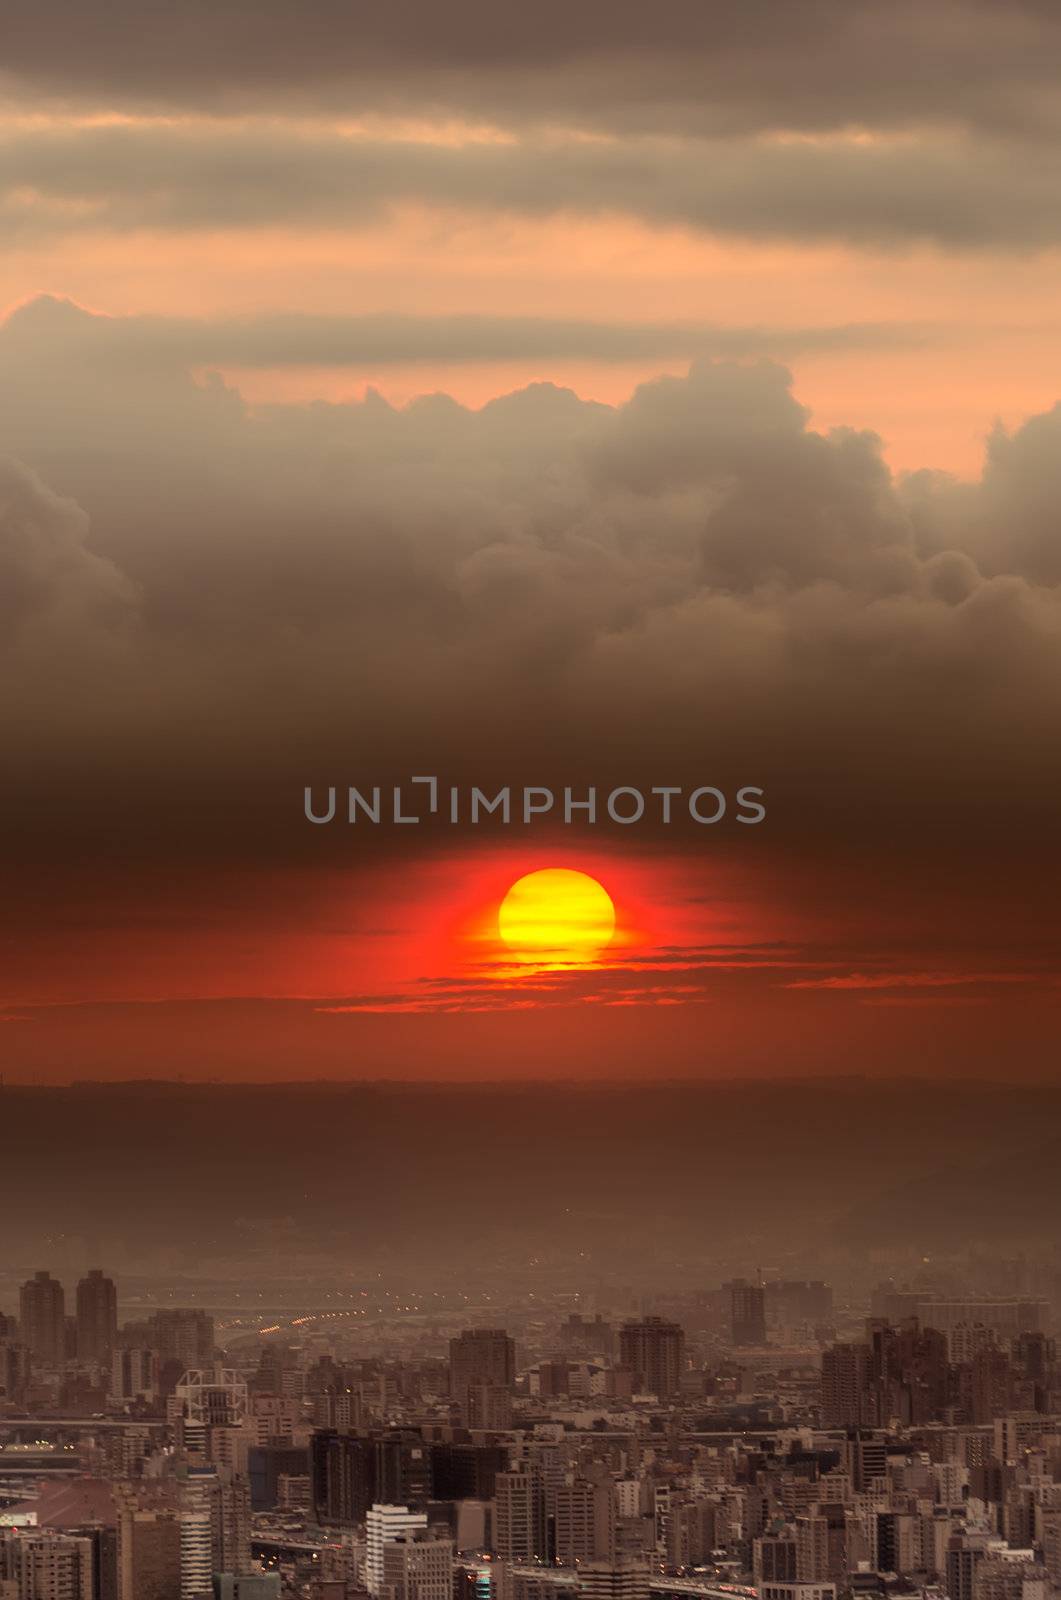 Sunset city scenery with red sun over buildings and clouds in Taipei, Taiwan, Asia.